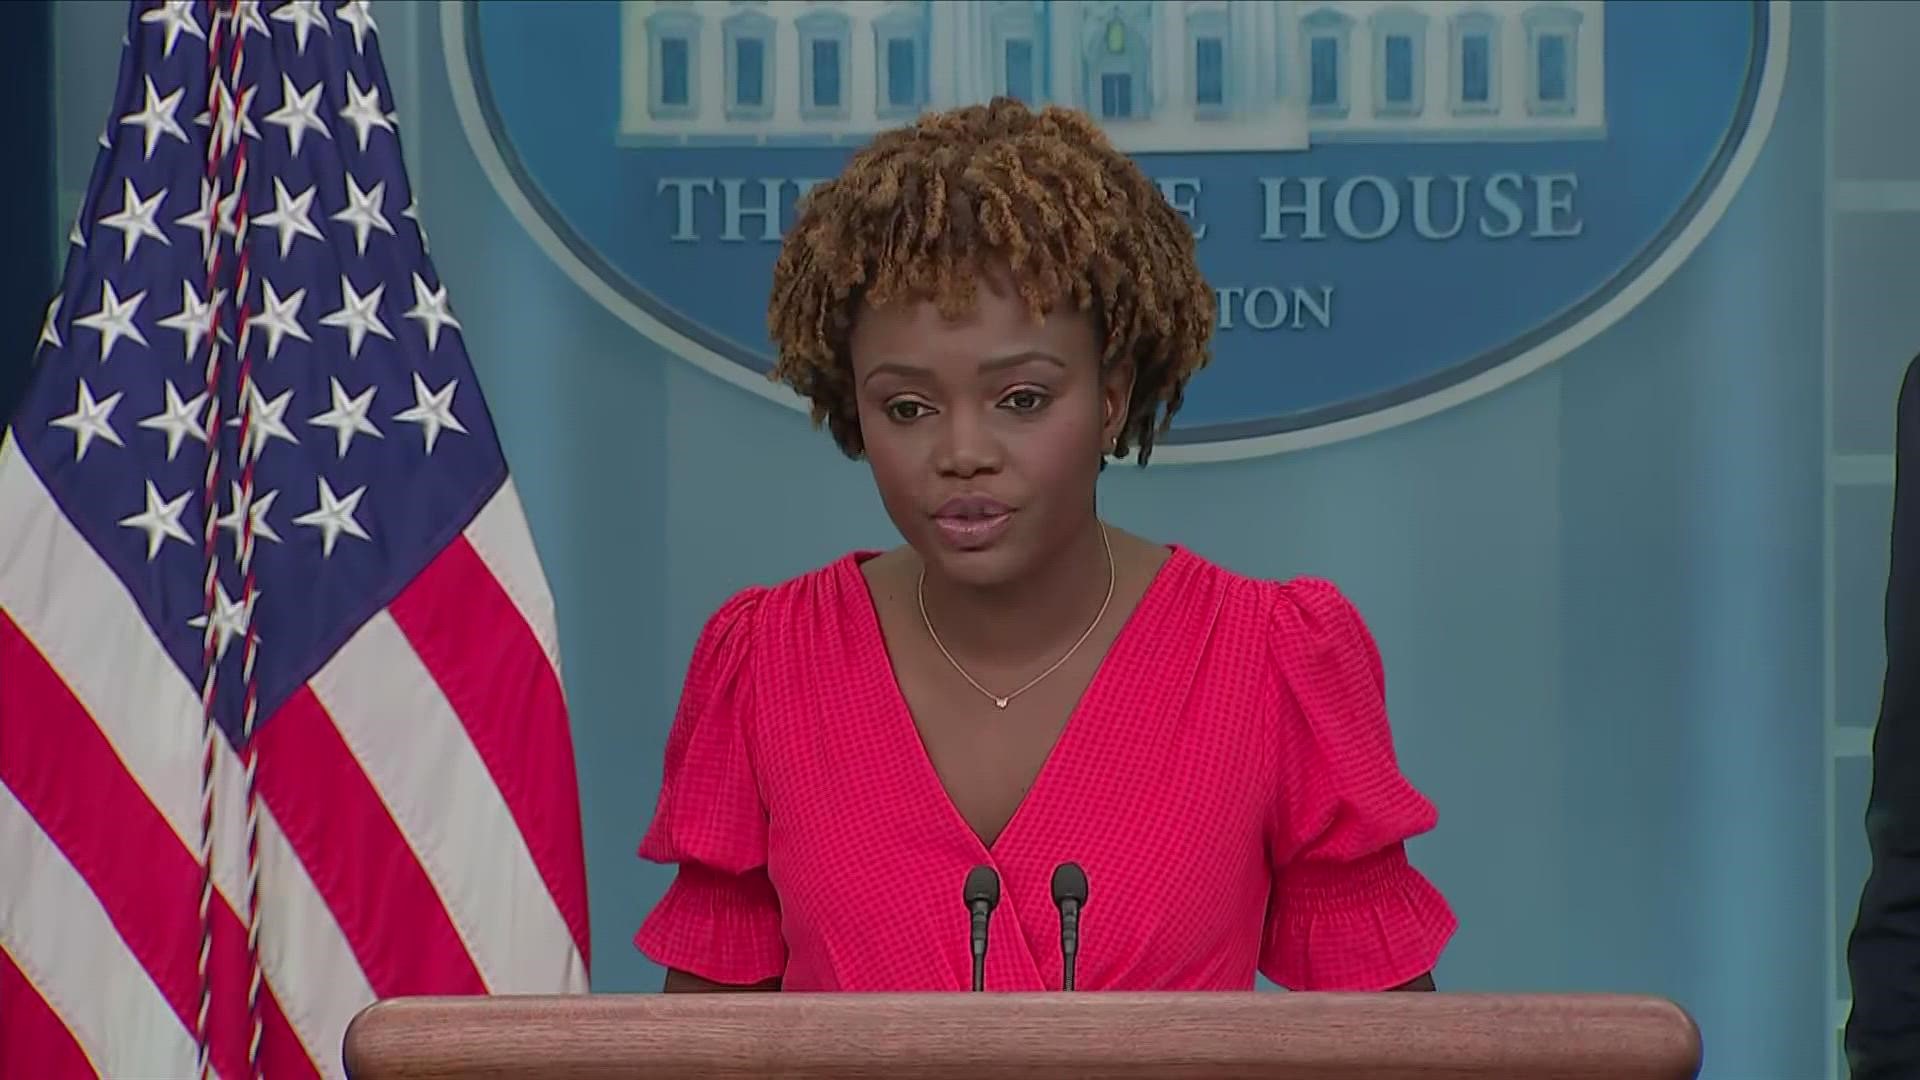 Press Secretary Karine Jean-Pierre said Dr. Kevin O'Connor will be giving daily updates on Biden's health after he tested positive for COVID-19.